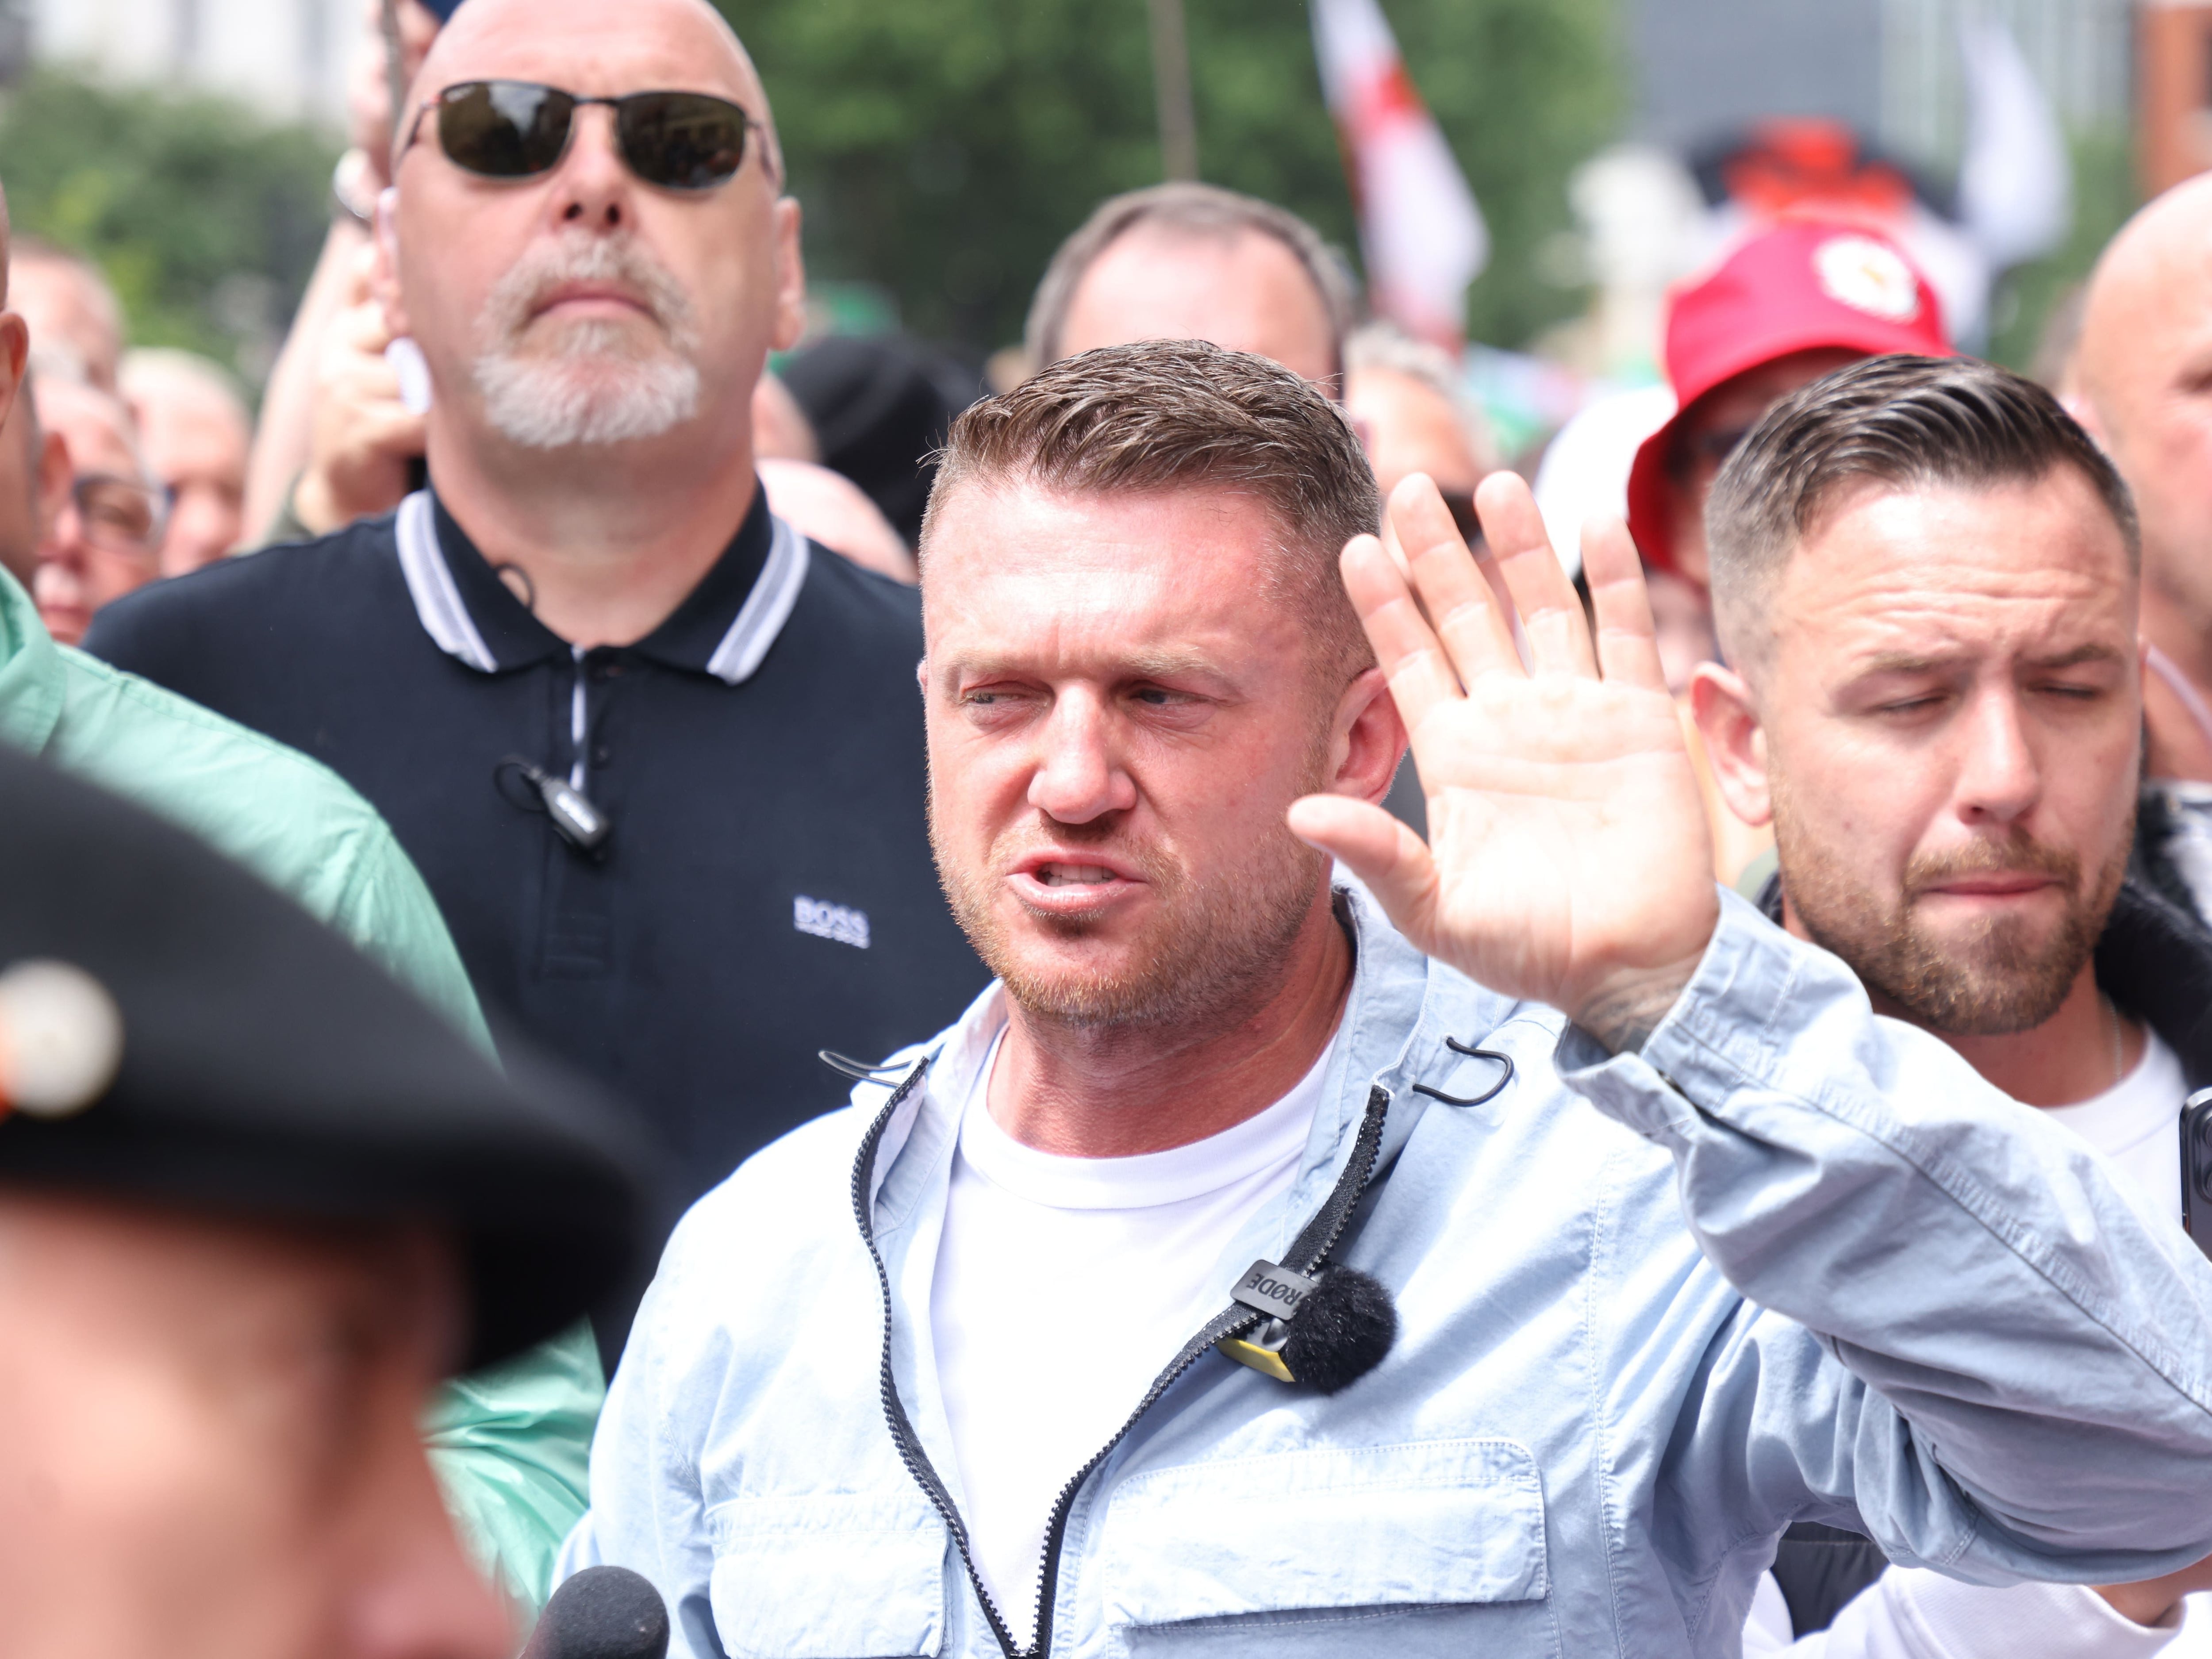 Crowds gather in central London for protest led by Tommy Robinson